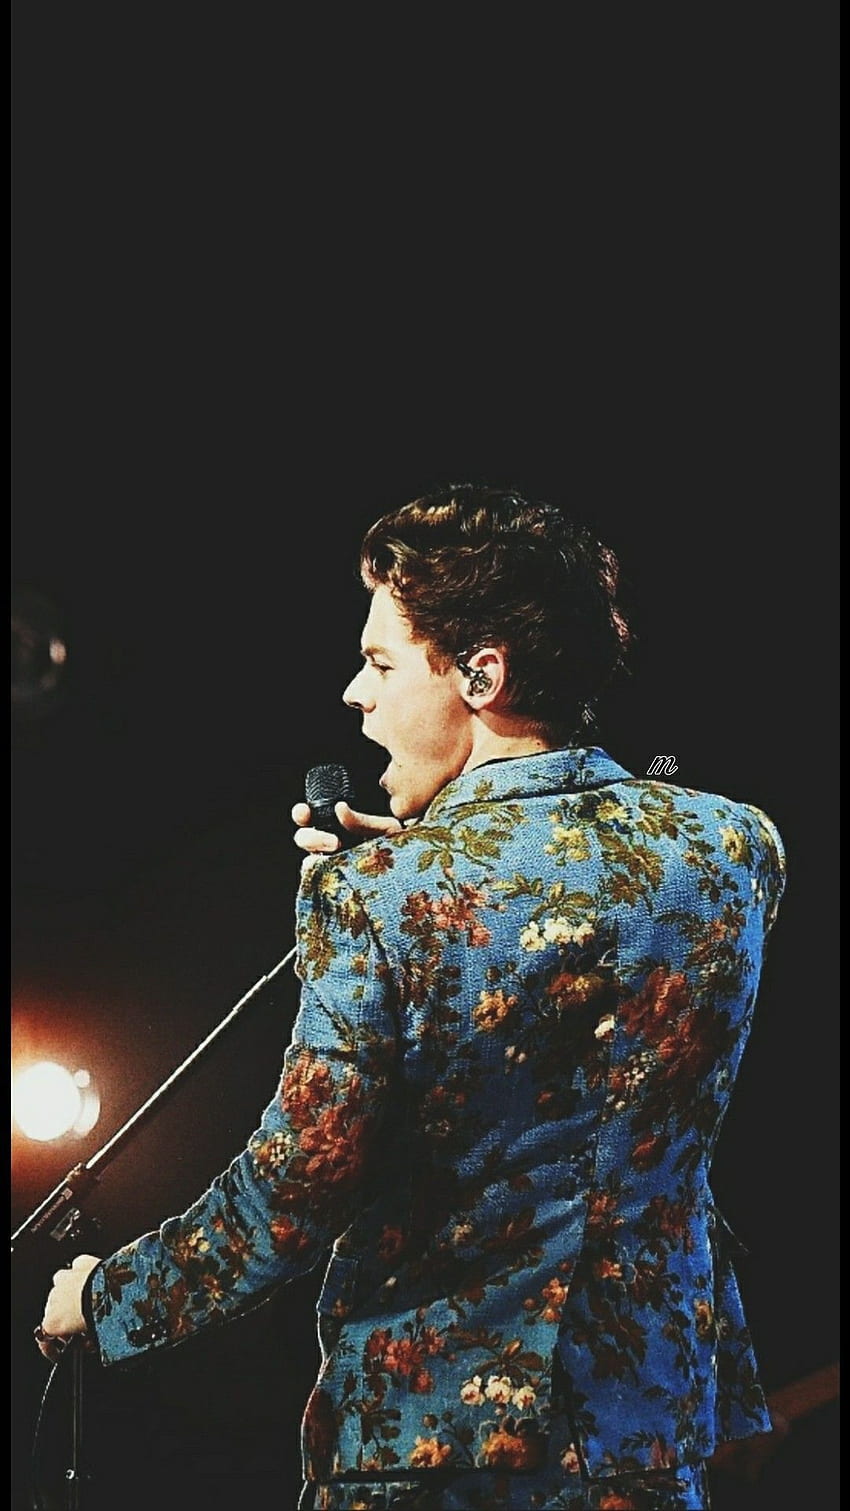 6) Tumblr | Harry styles live, Harry styles smile, Harry styles cute